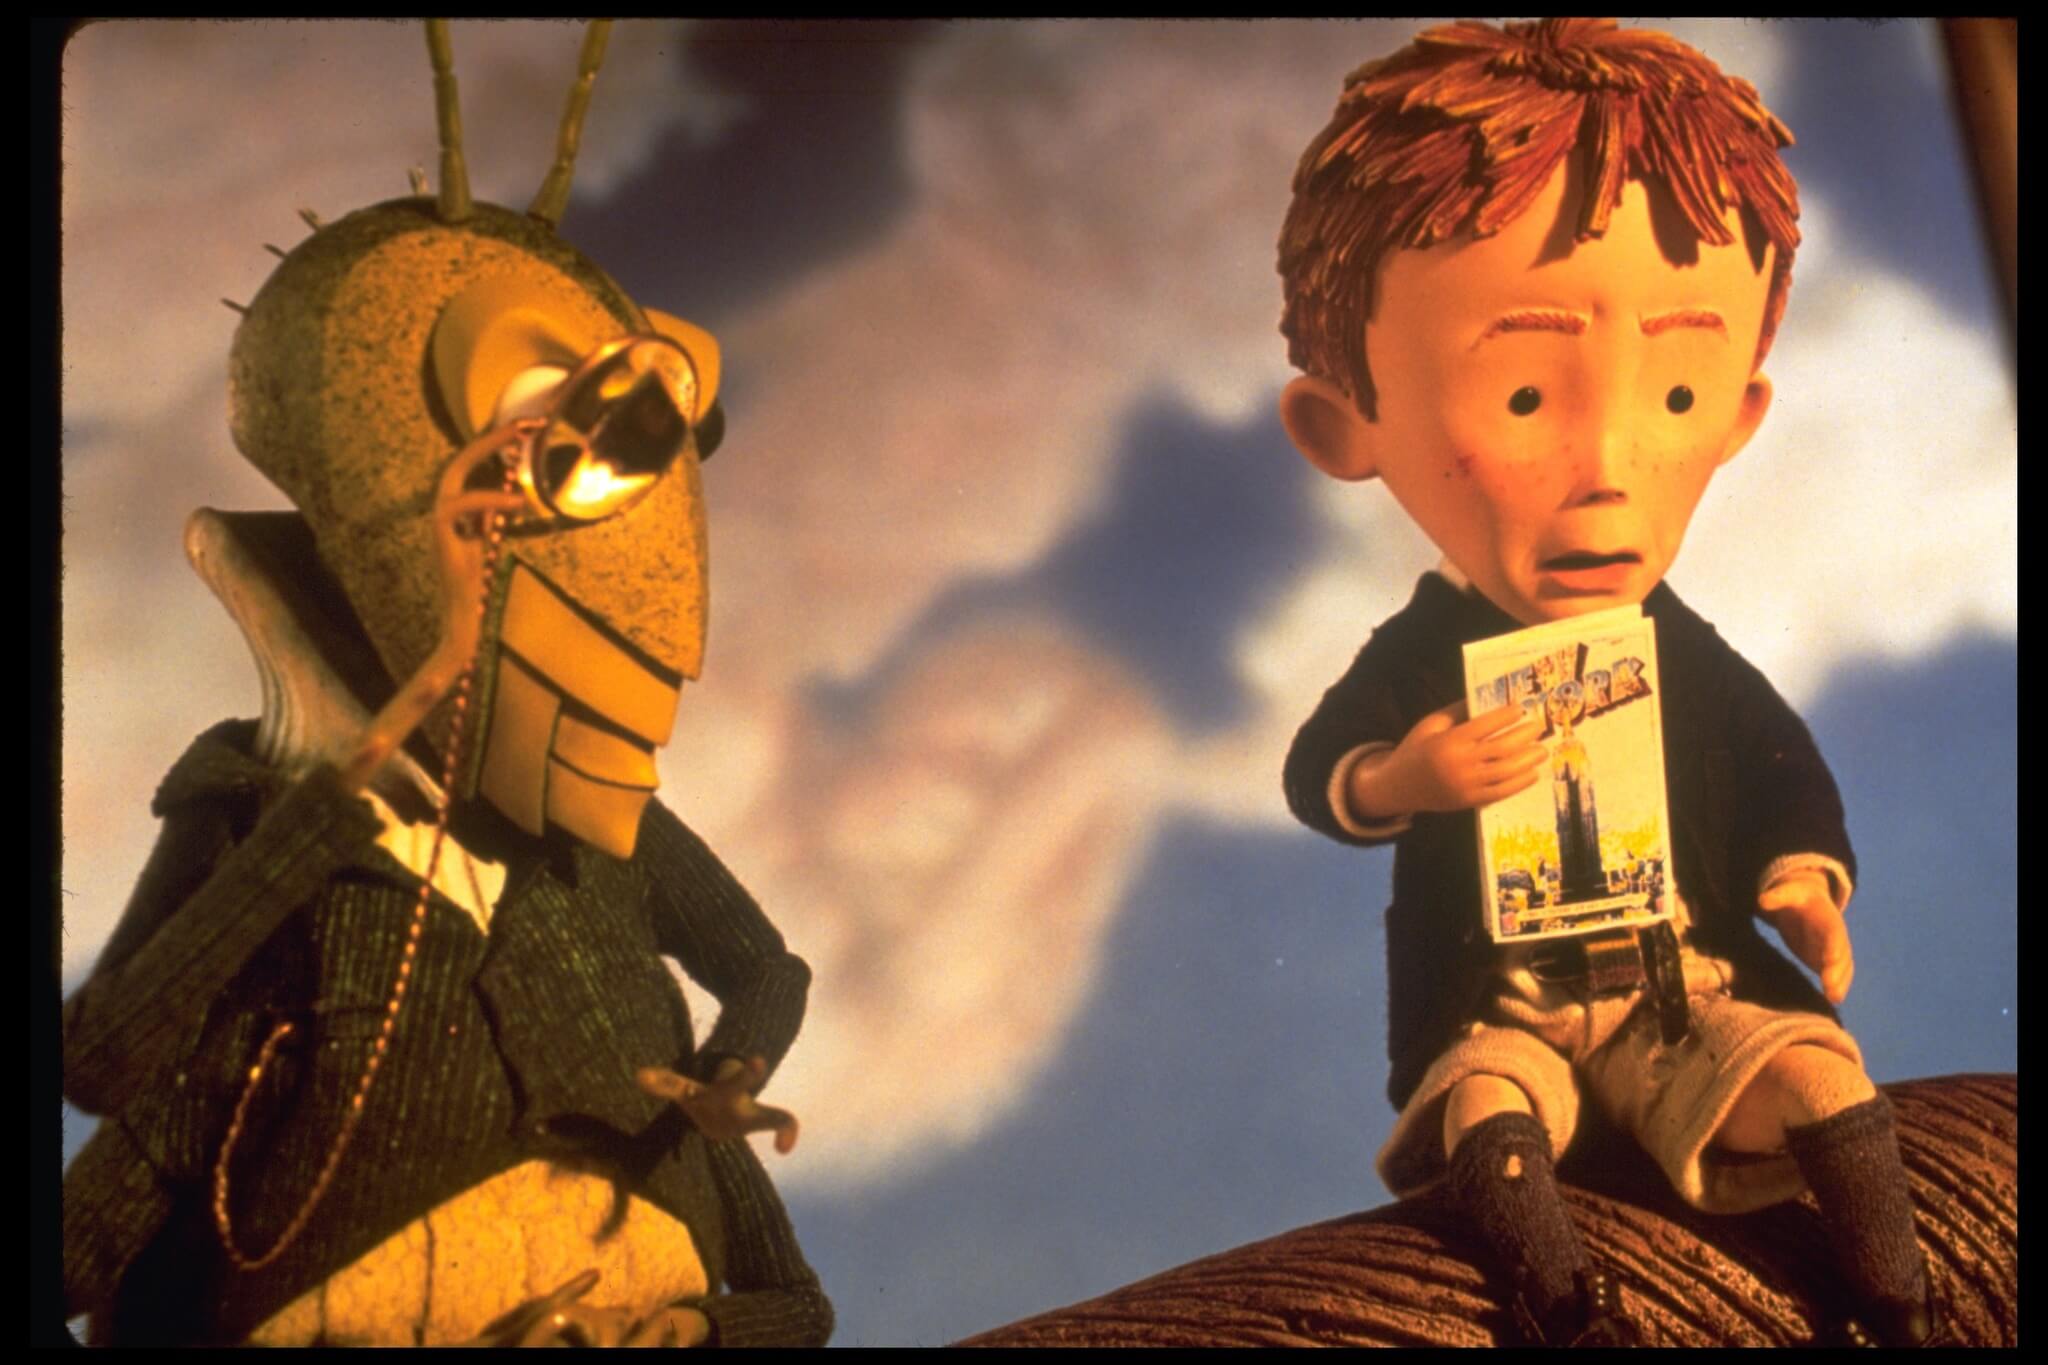 James-and-the-Giant-Peach-(1996)-in-South Korea